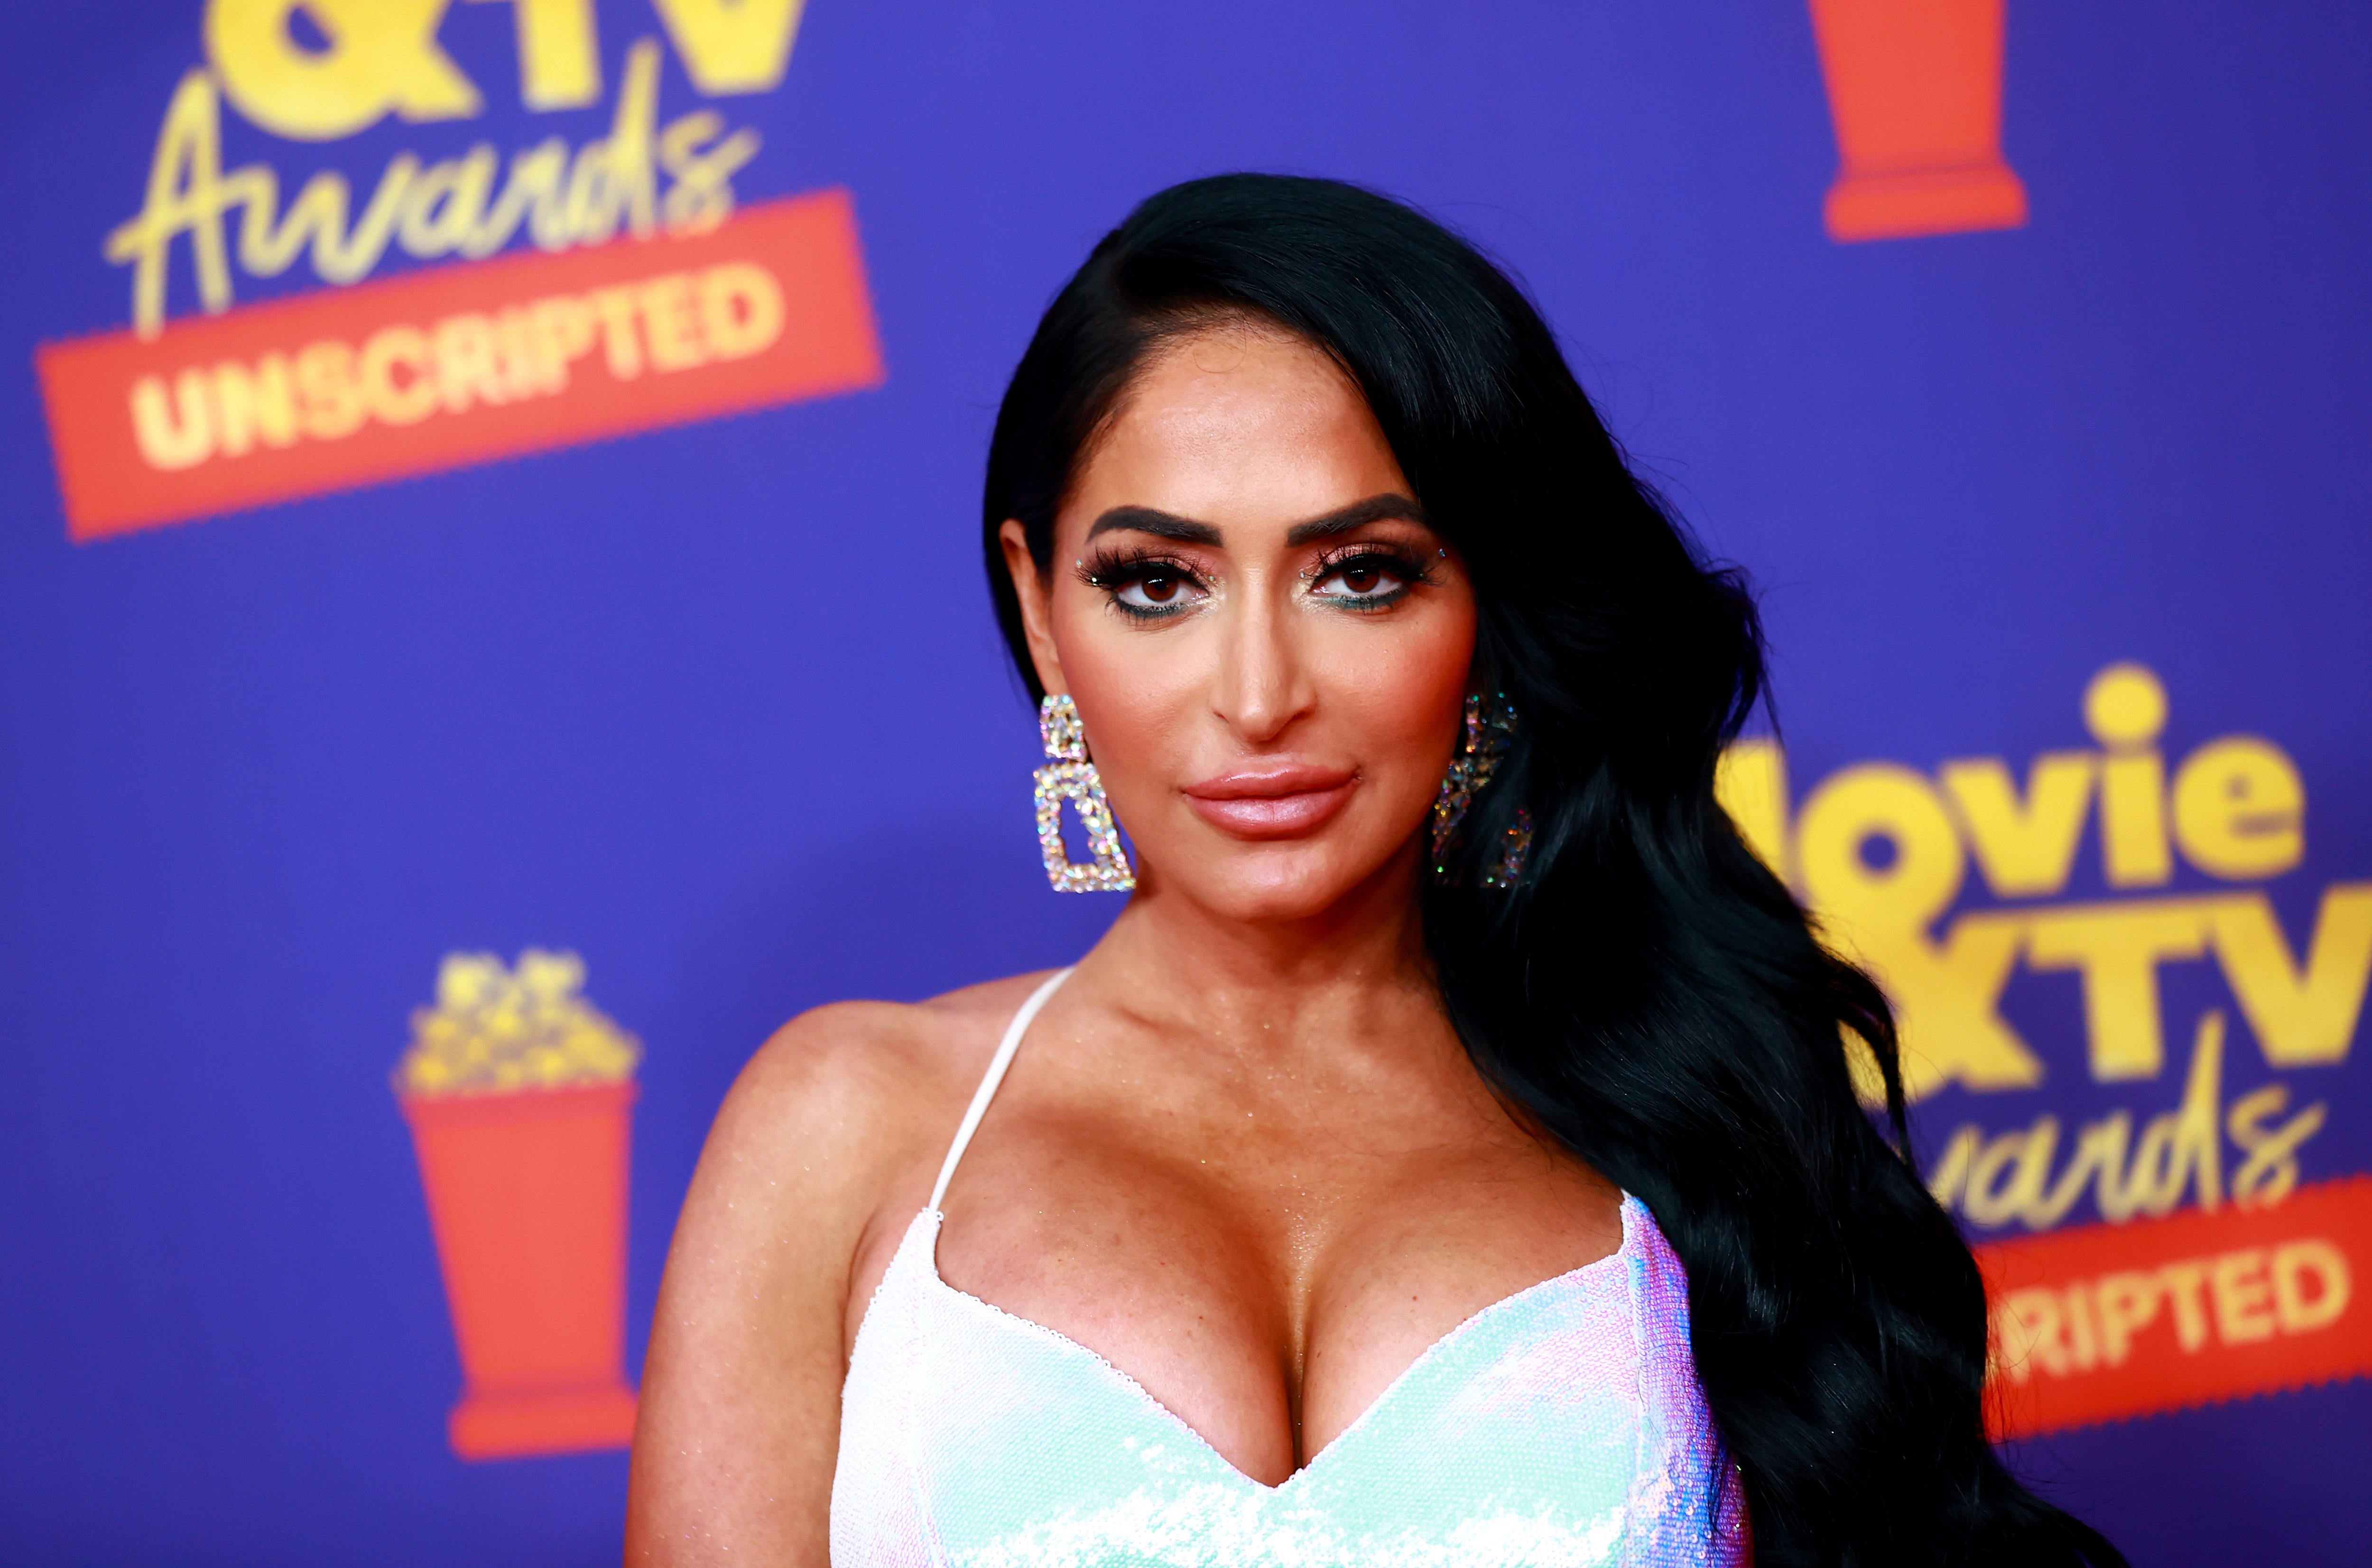 'Jersey Shore' star Angelina Pivarnick poses at an MTV event